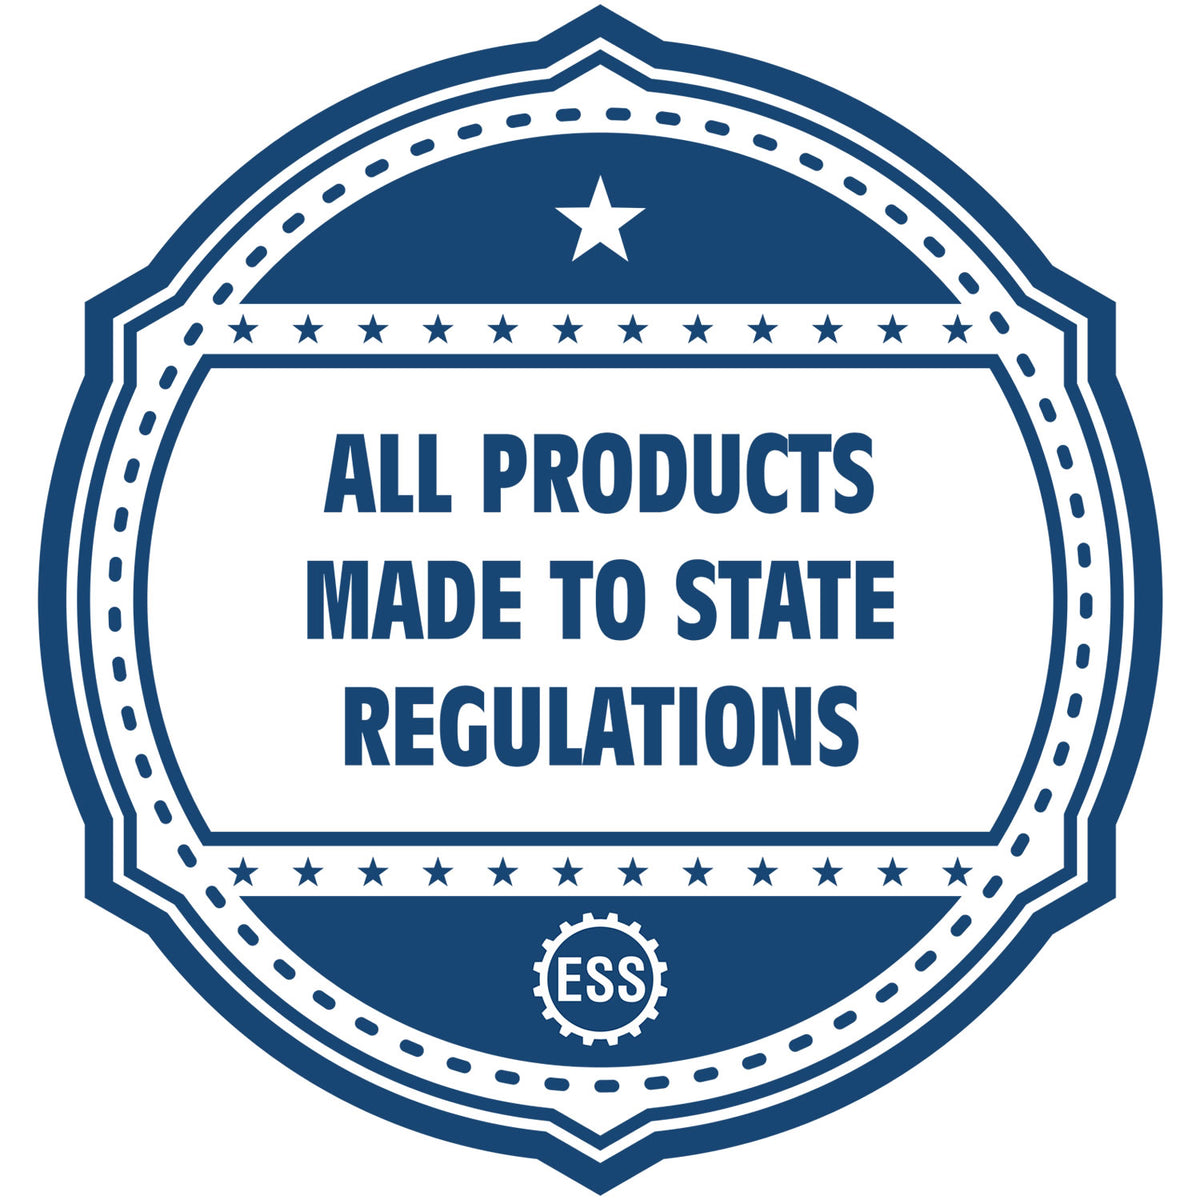 An icon or badge element for the Heavy Duty Cast Iron Maine Land Surveyor Seal Embosser showing that this product is made in compliance with state regulations.